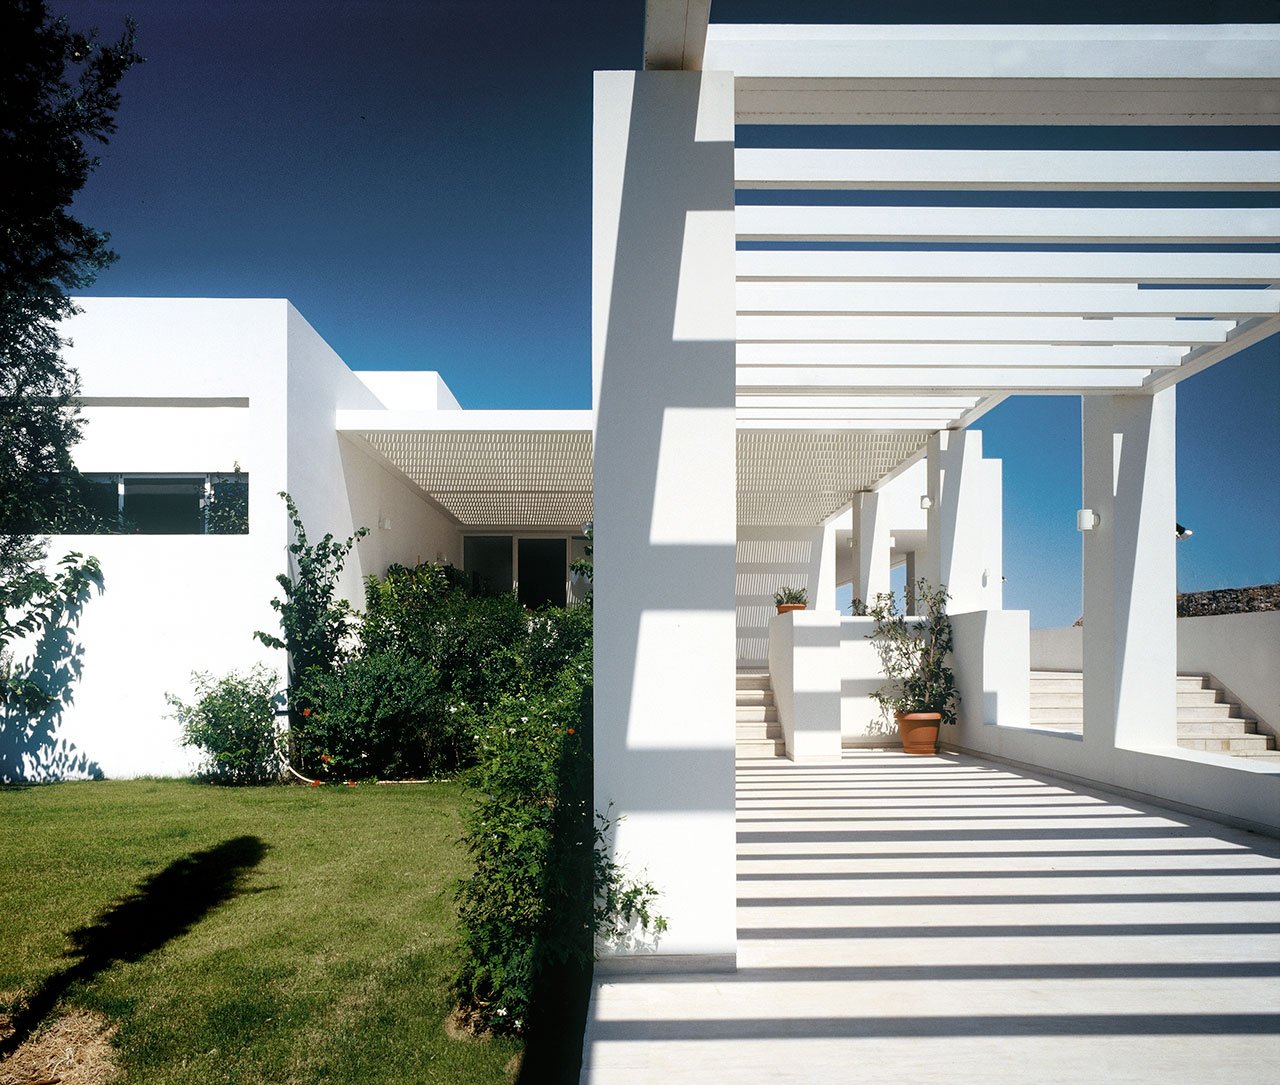 House in Koilada, Greece. Constructed by Domotekton. Photo © Nicos Valsamakis.